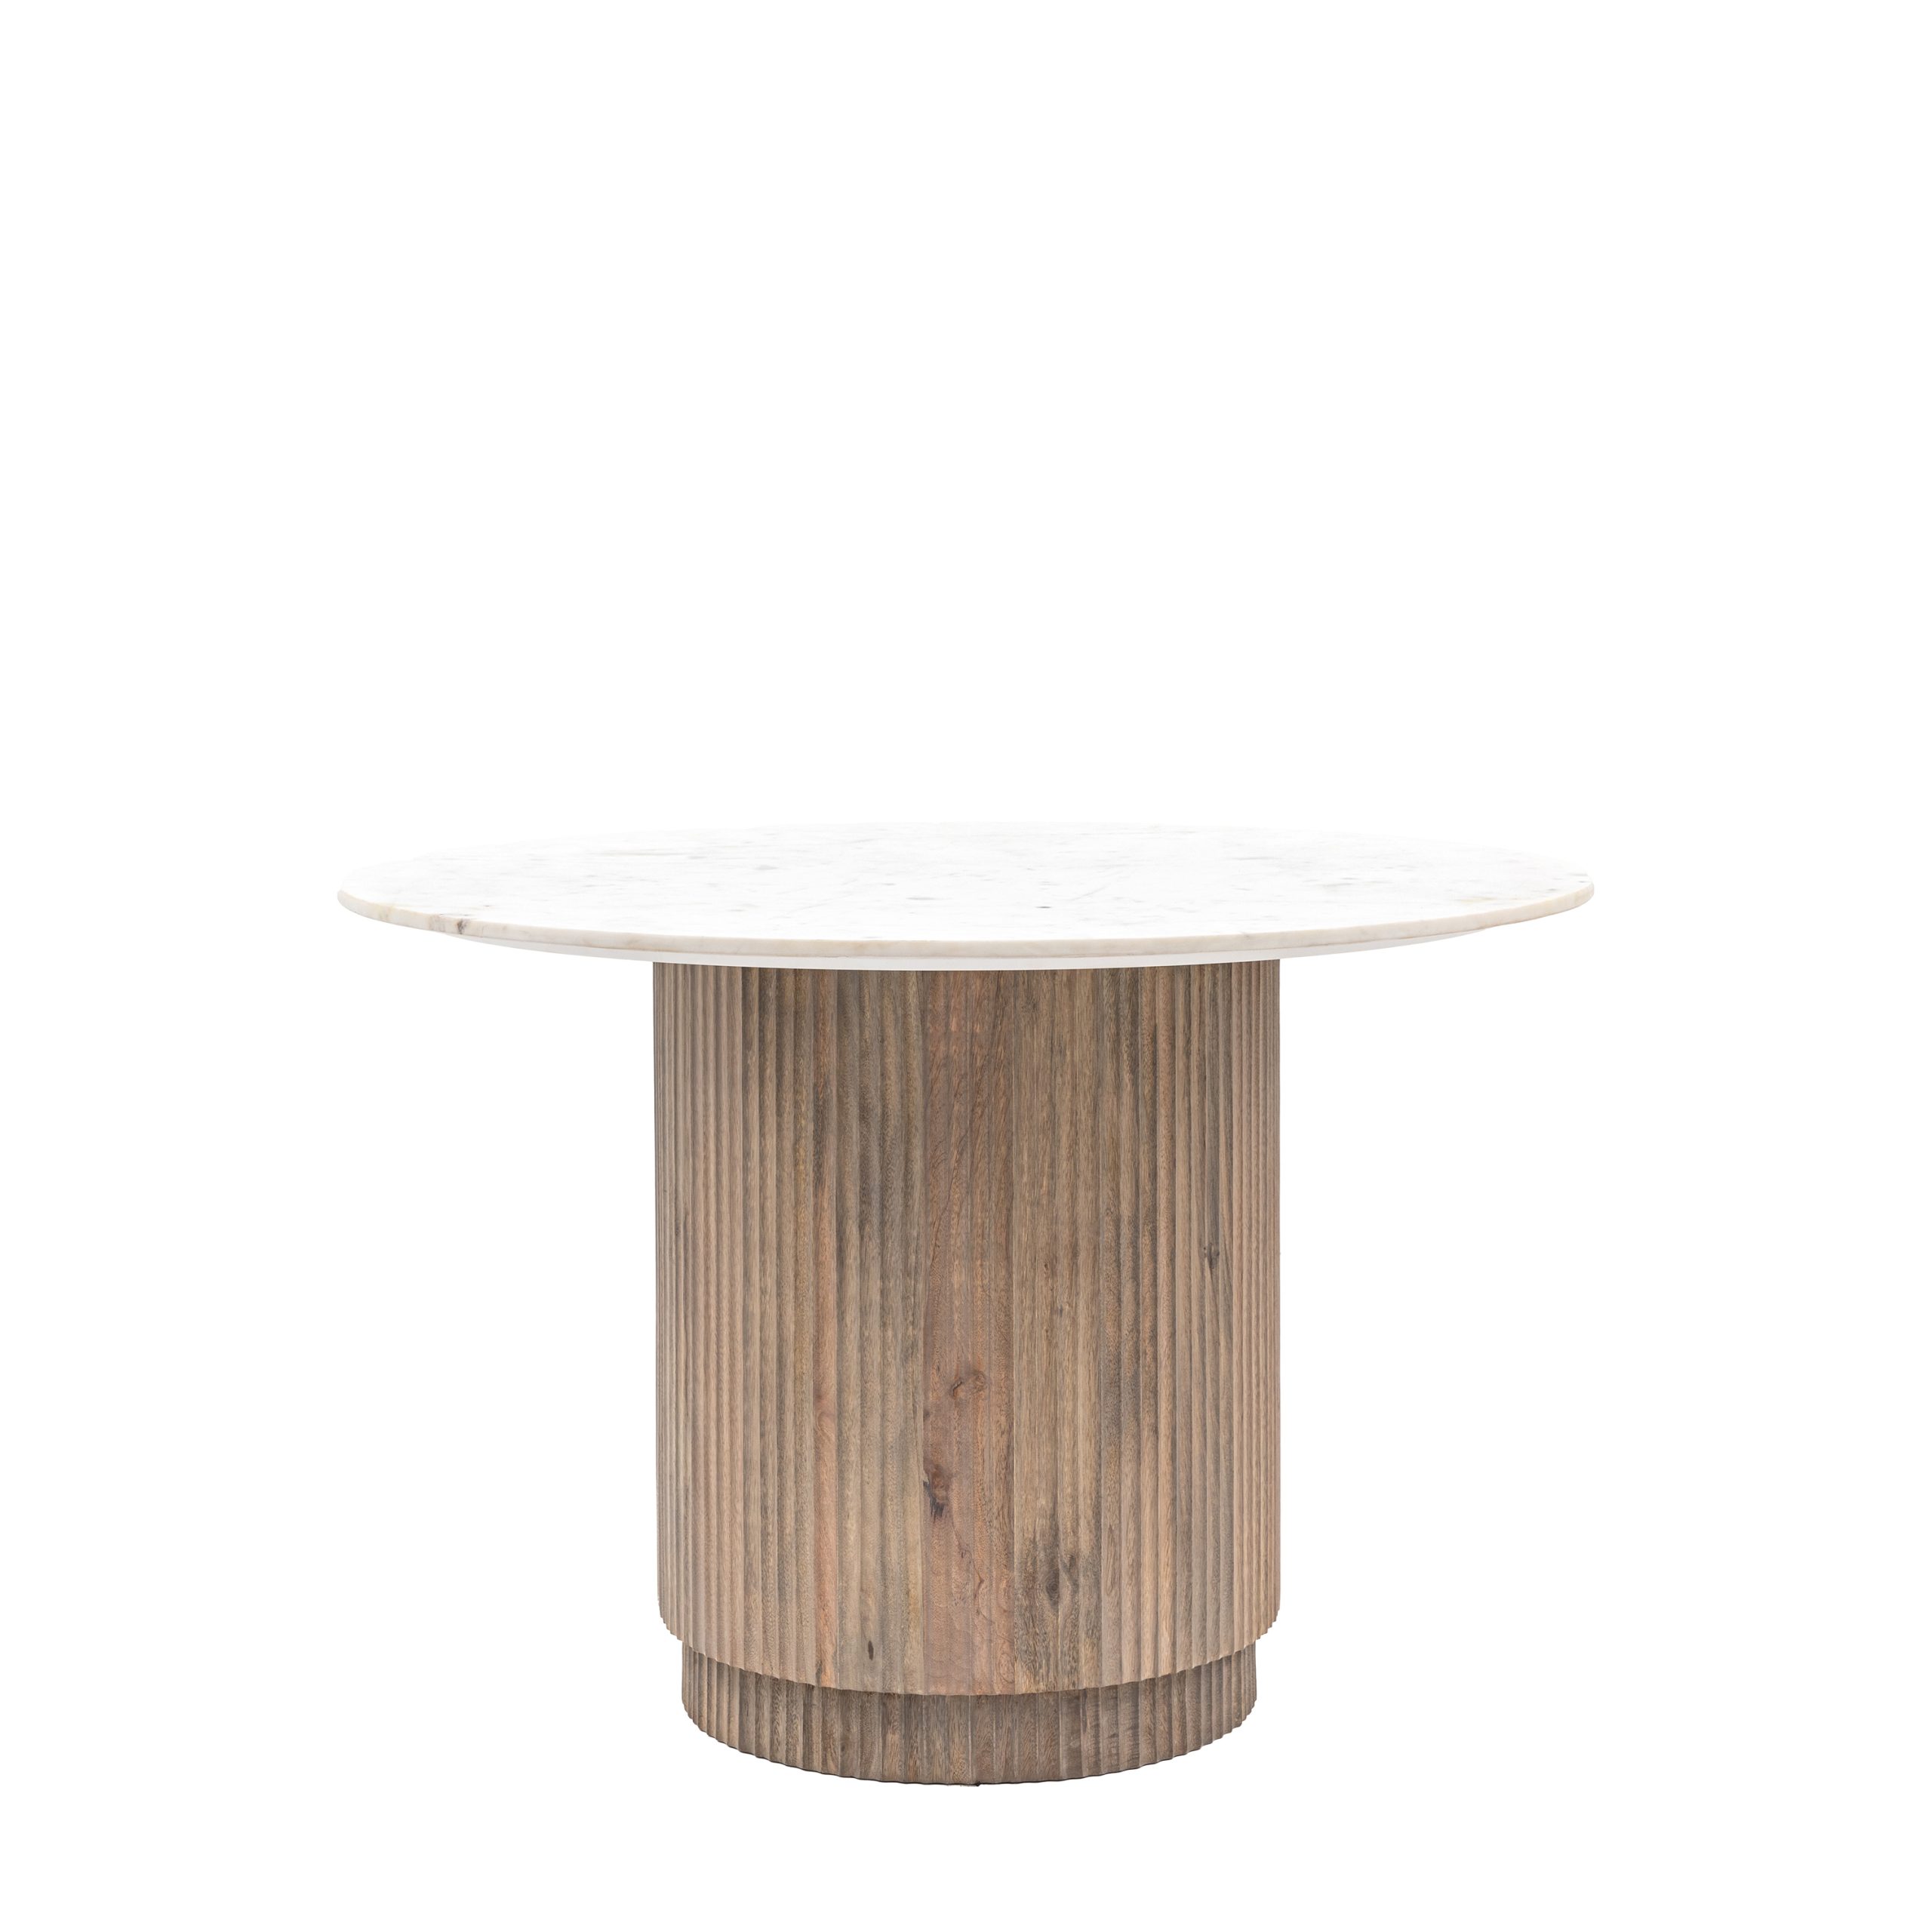 Gallery Direct Marmo Round Dining Table